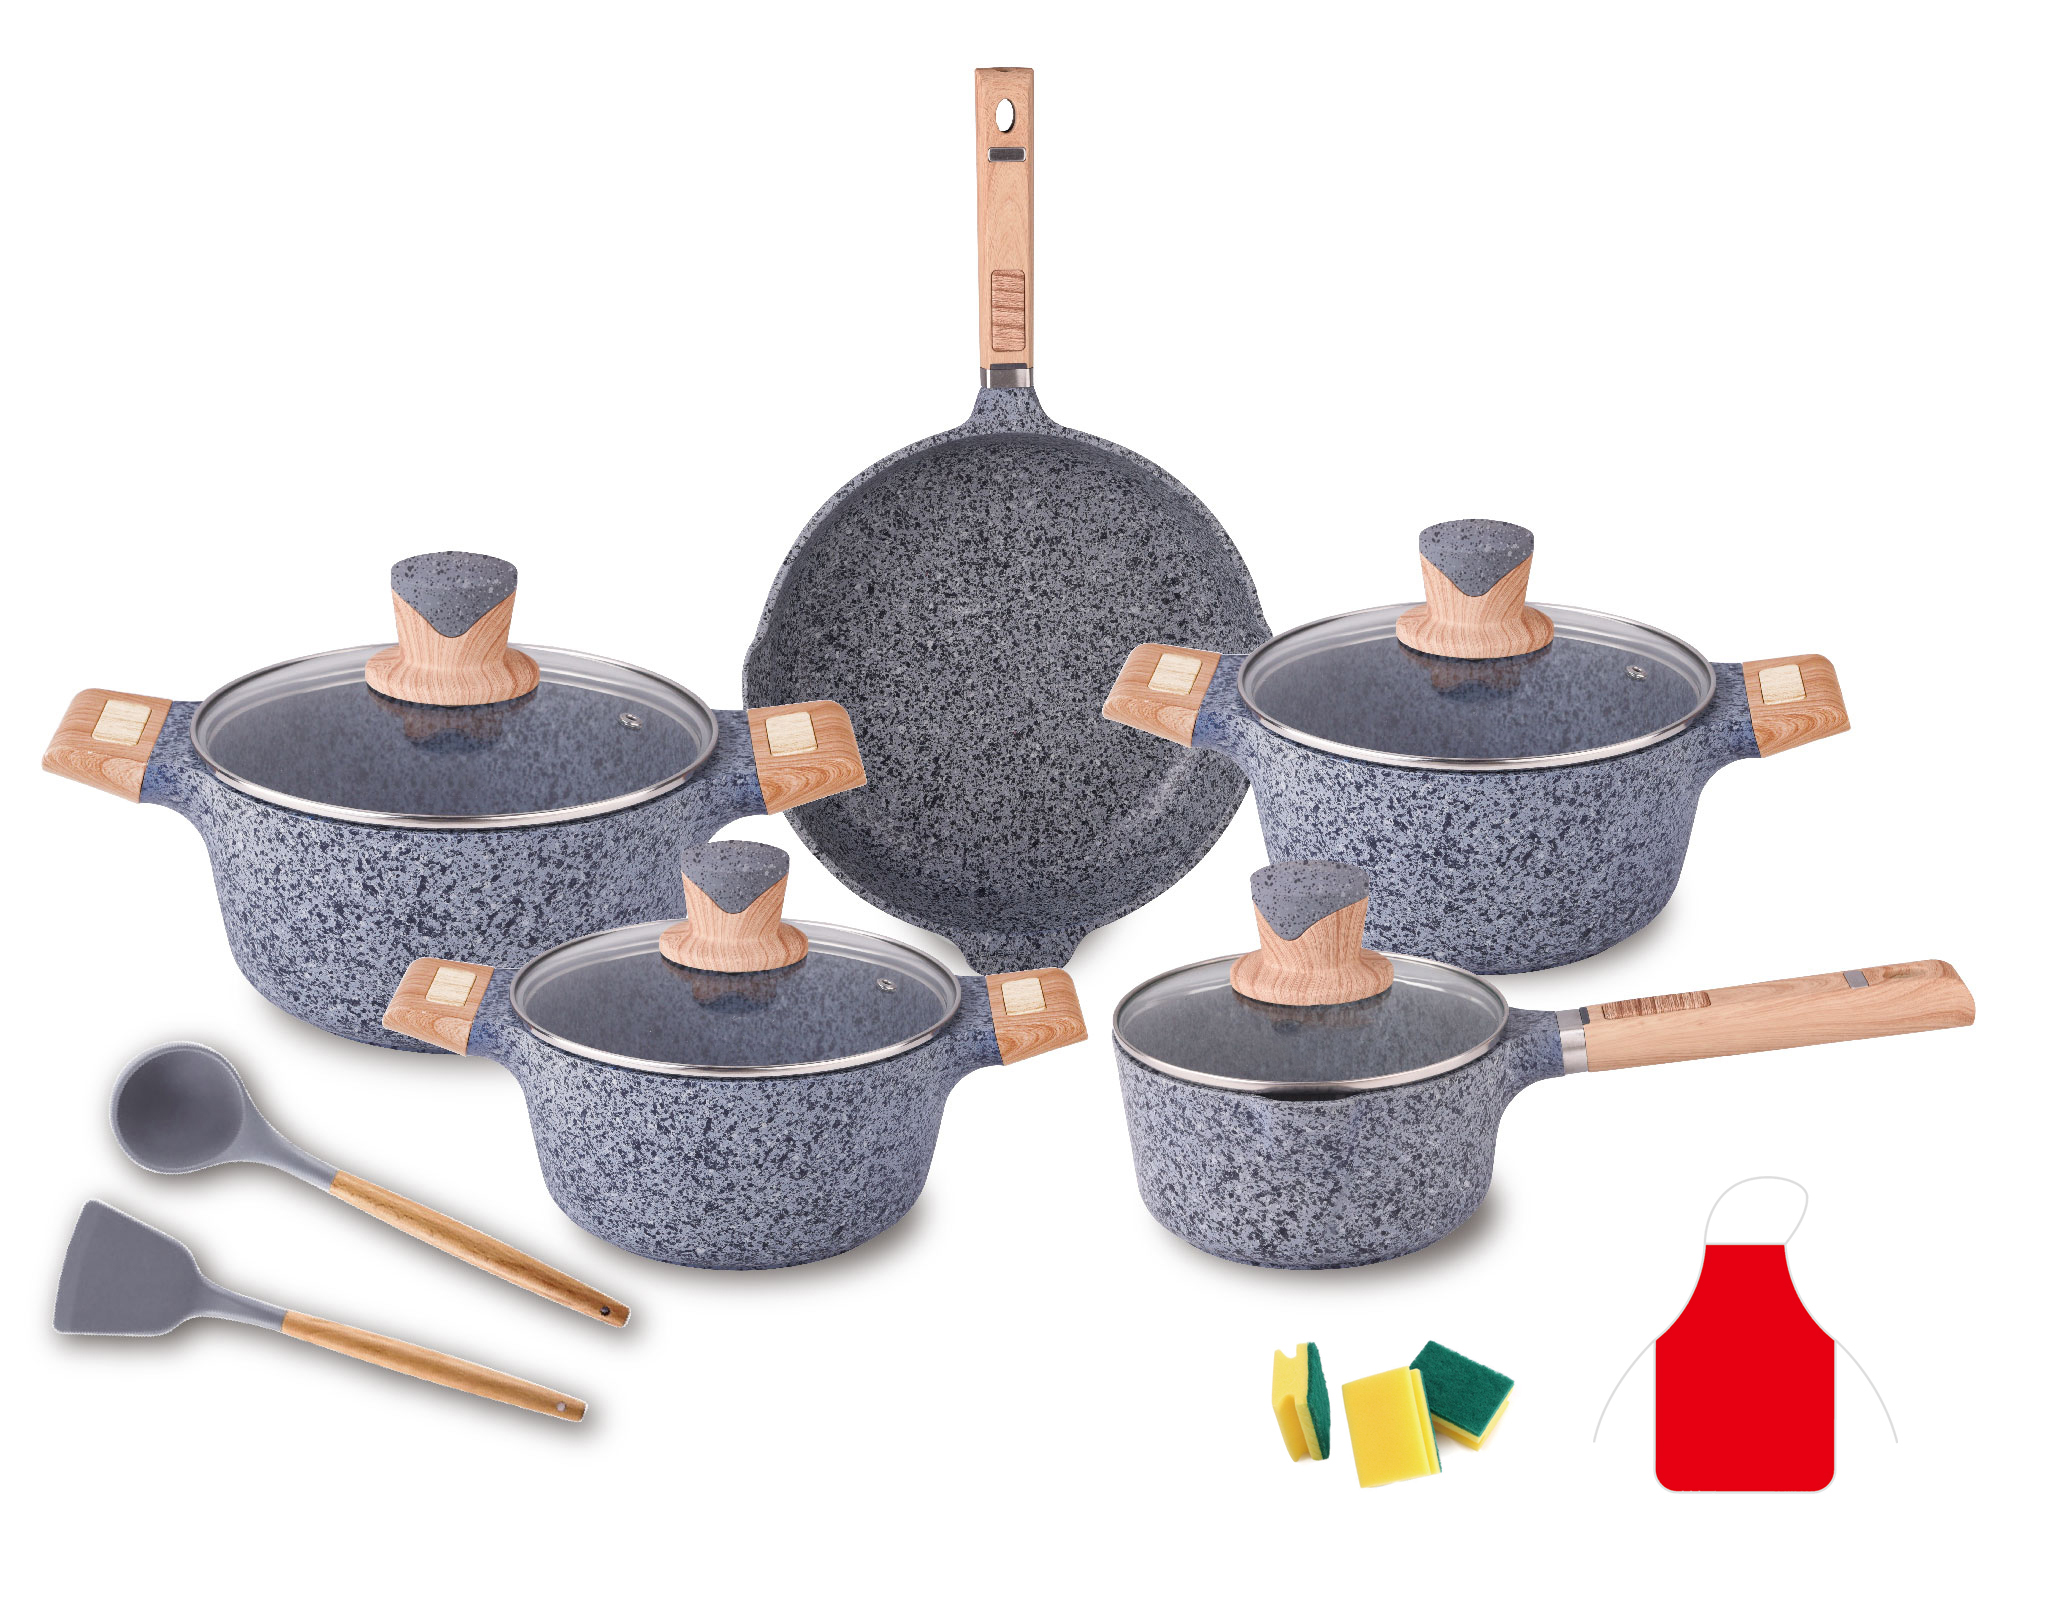 Diecast Granite Coated Wooden Handle 6pcs Aluminium Cookware Set Cooking Pot  from China Manufacturer - OSFE INDUSTRIAL CO., LTD